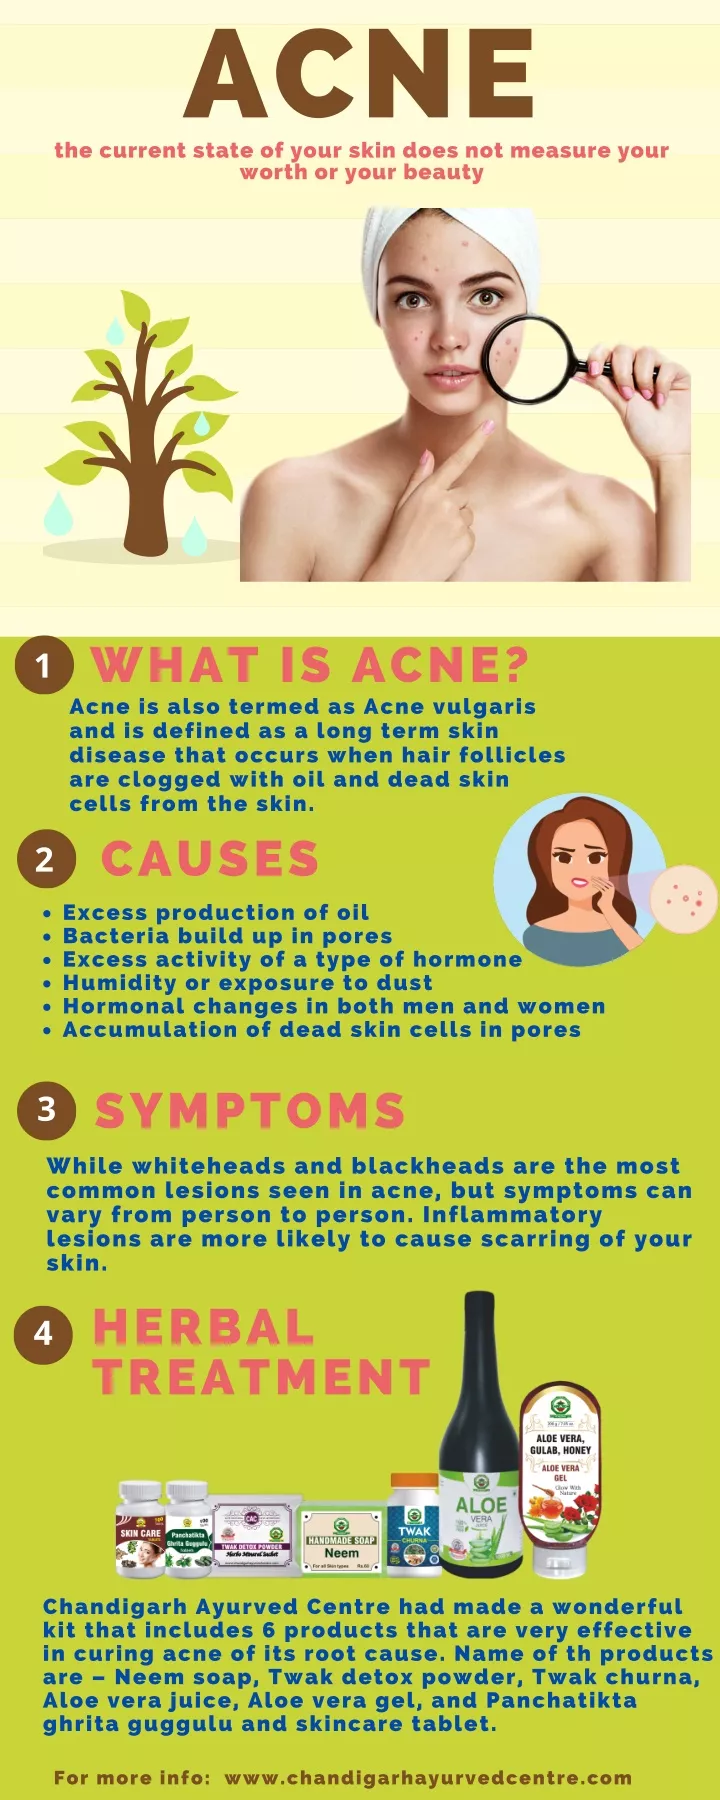 acne the current state of your skin does